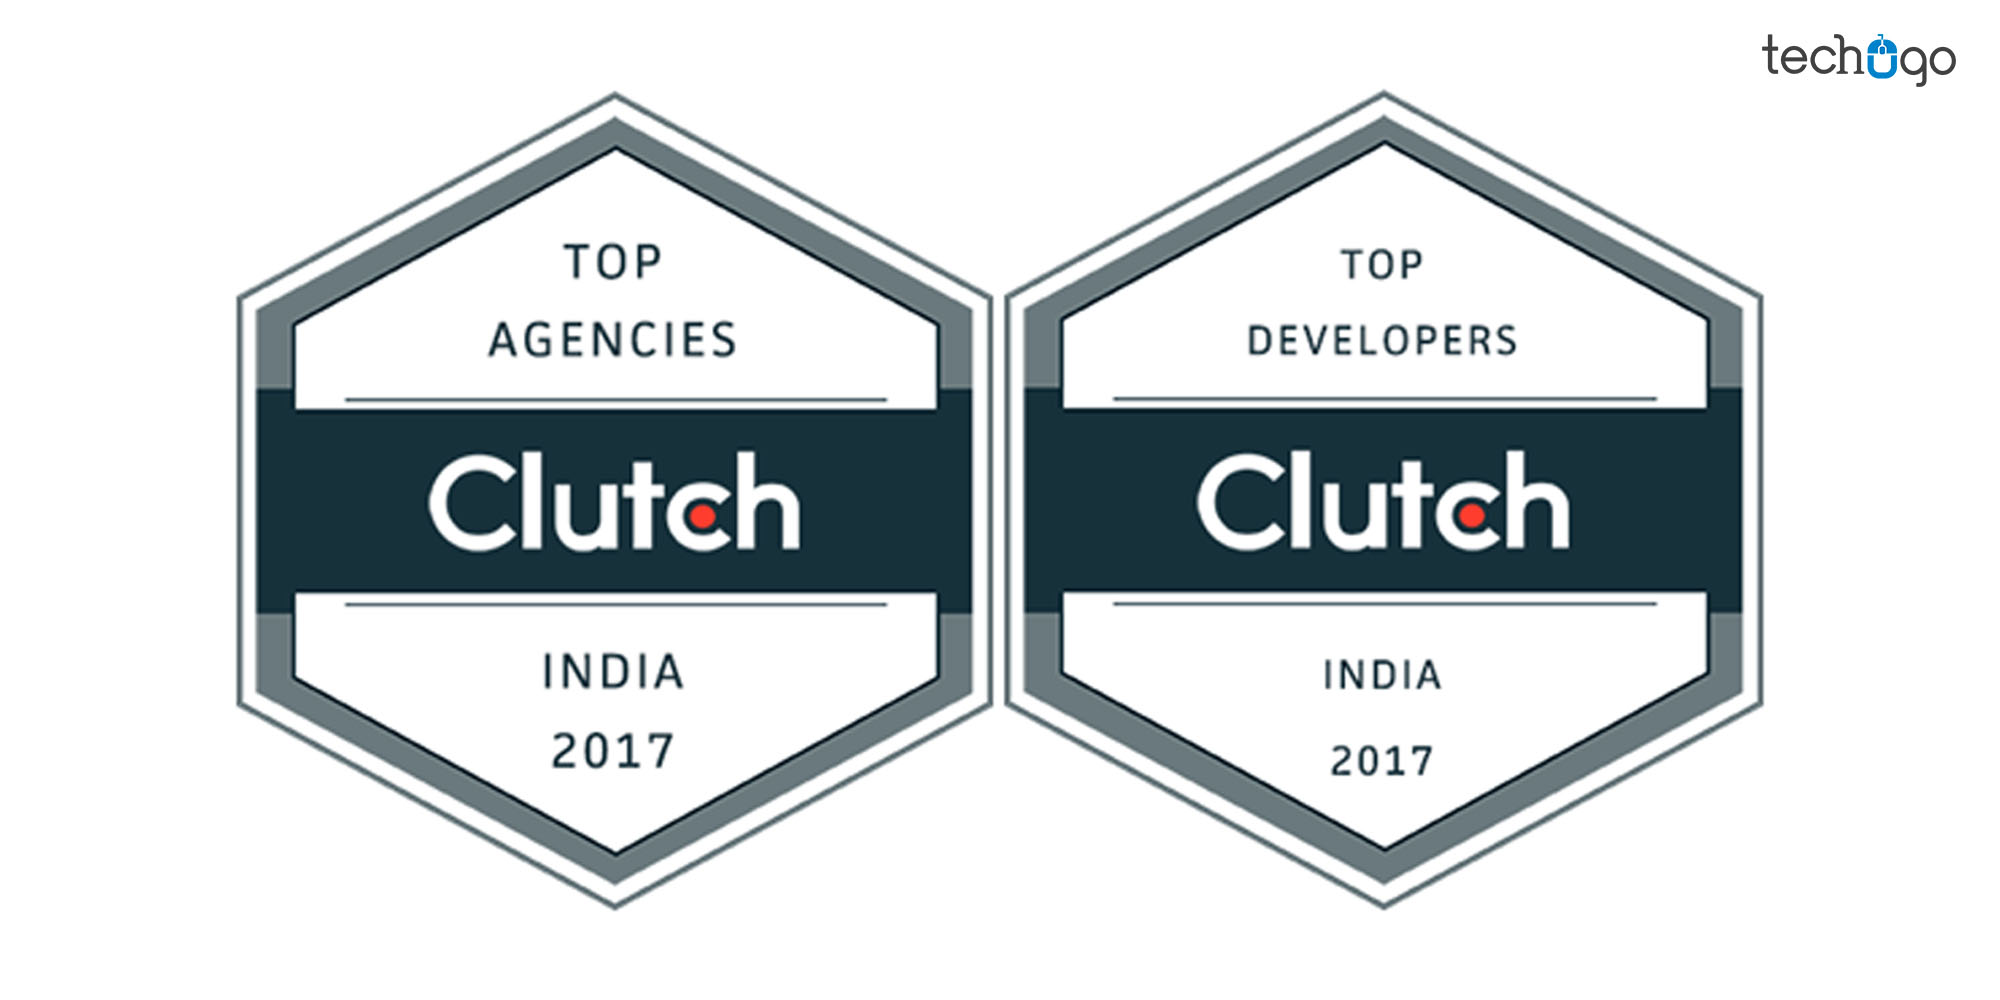 Techugo Named a Top Agency and Developer in India on Clutch!